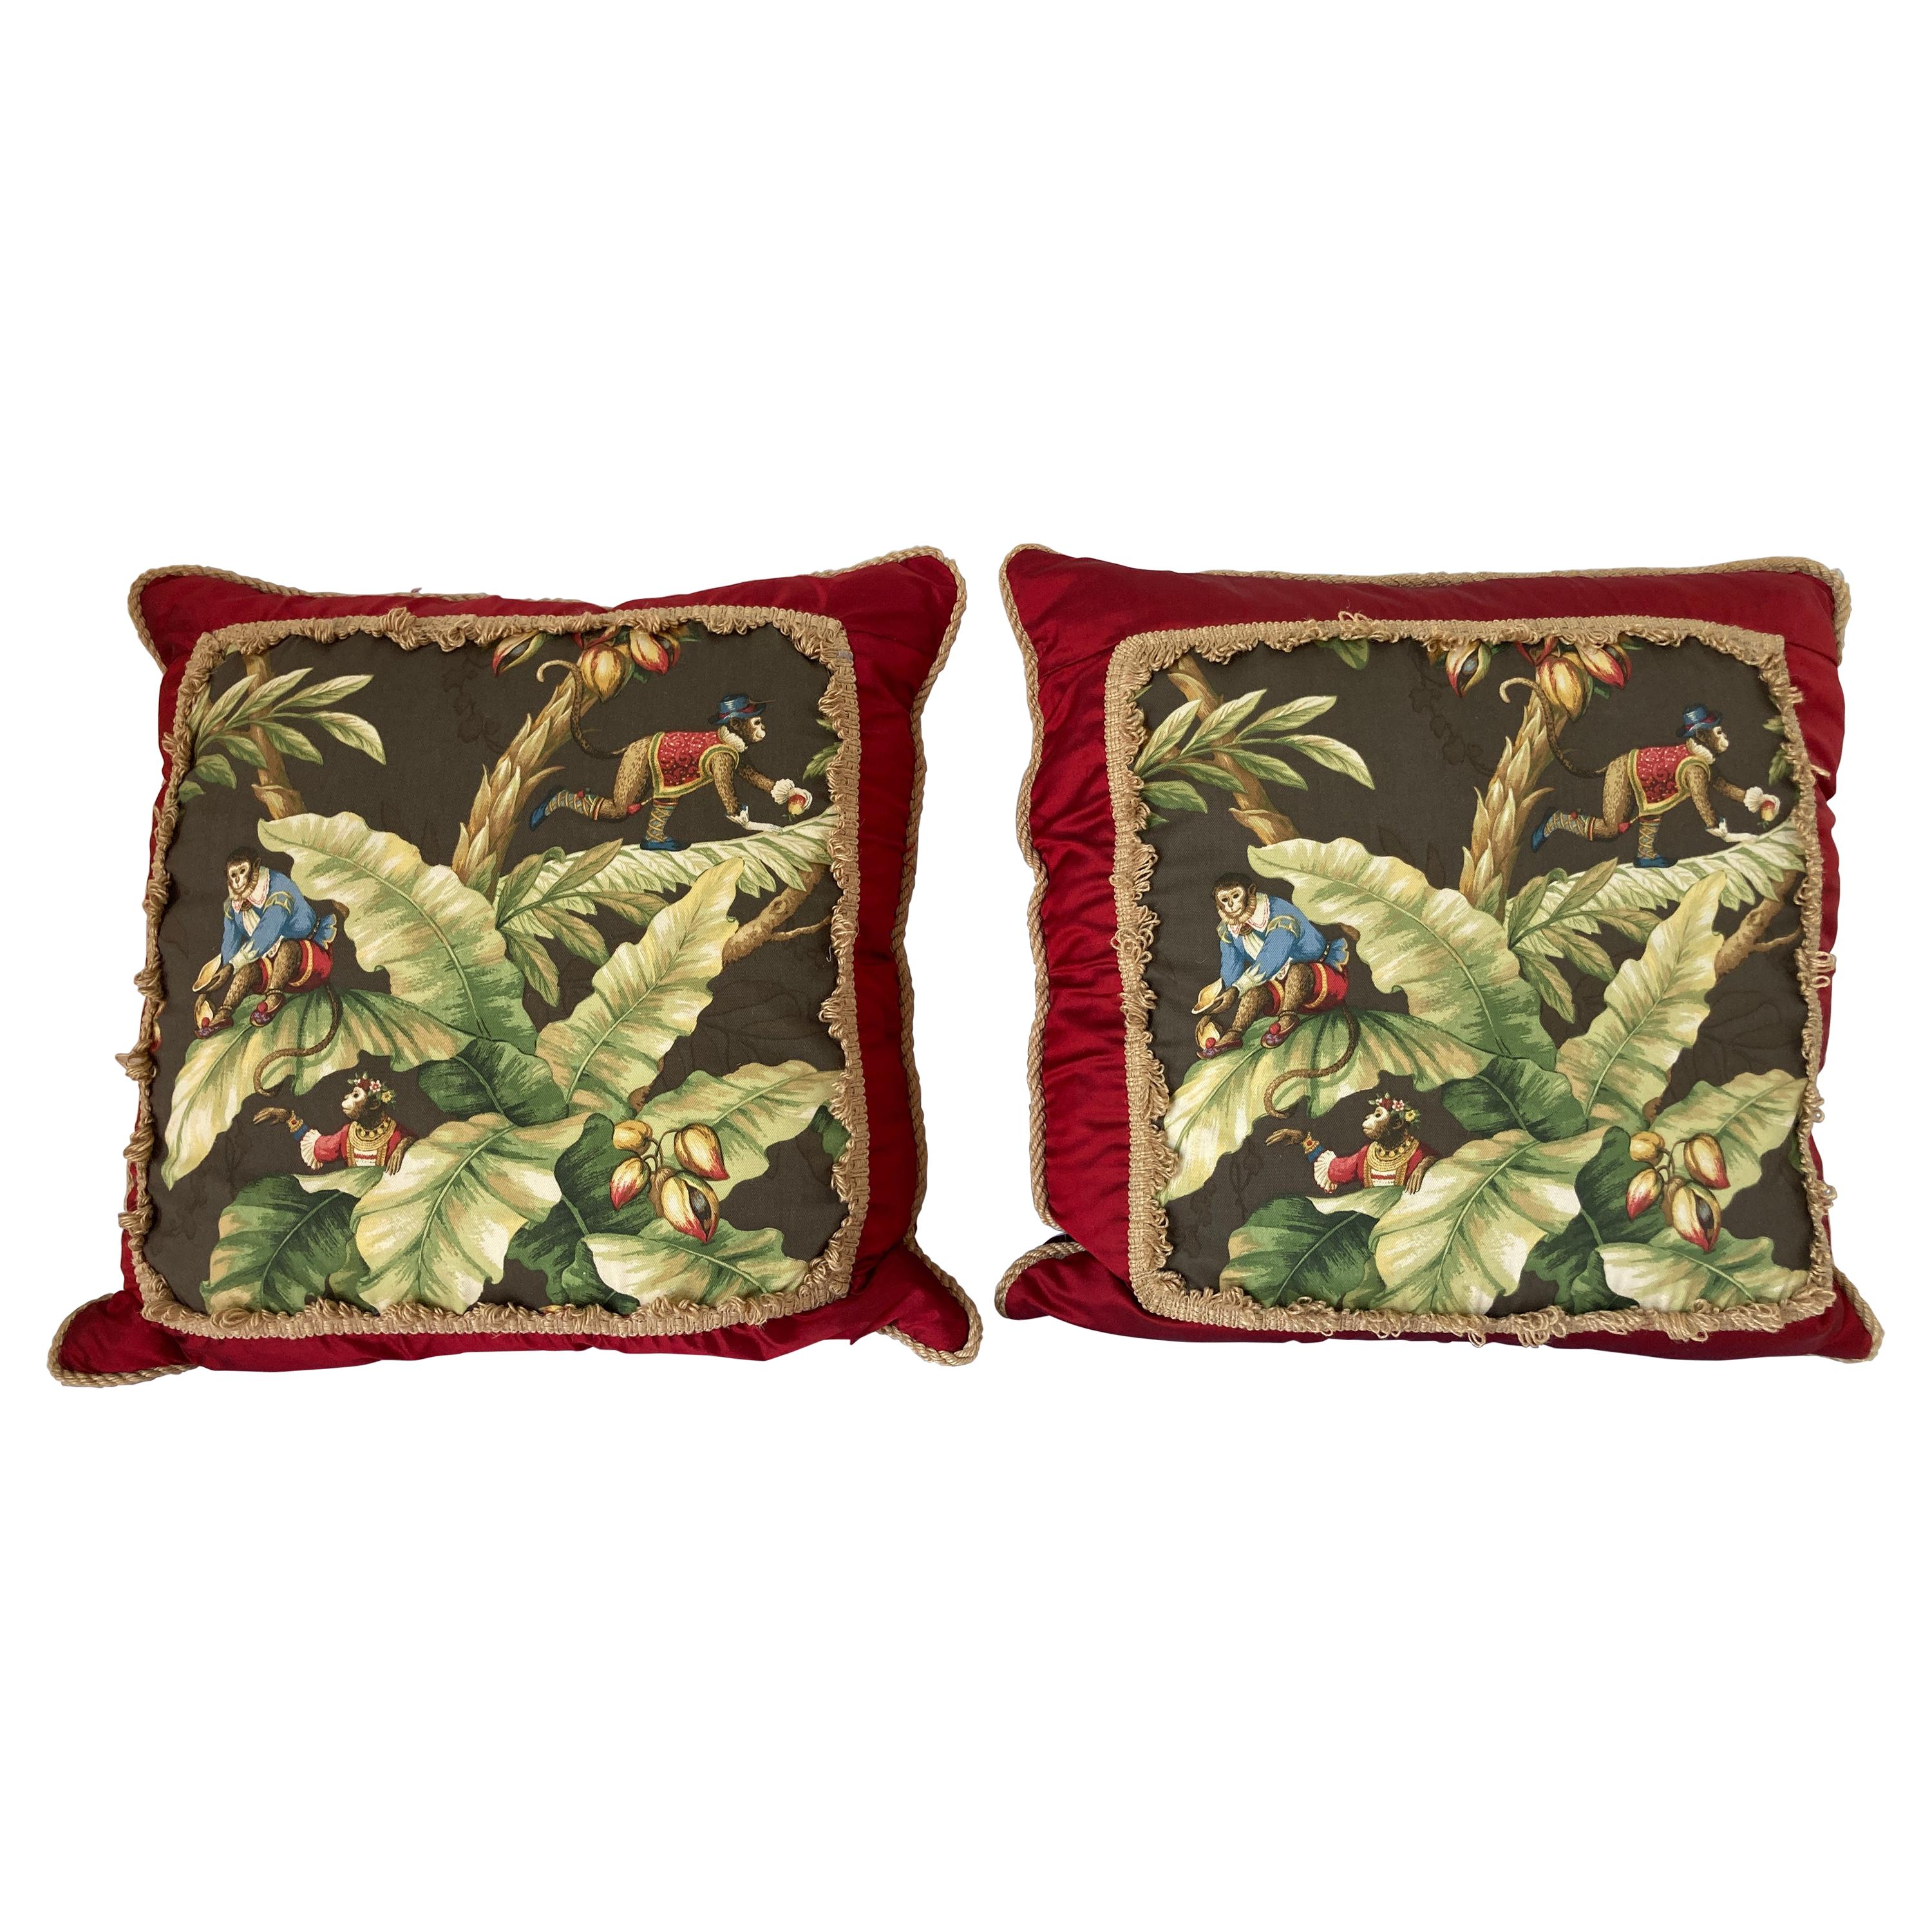 Two Large Throw Pillows with Tropical Jungle Boogie Monkeys